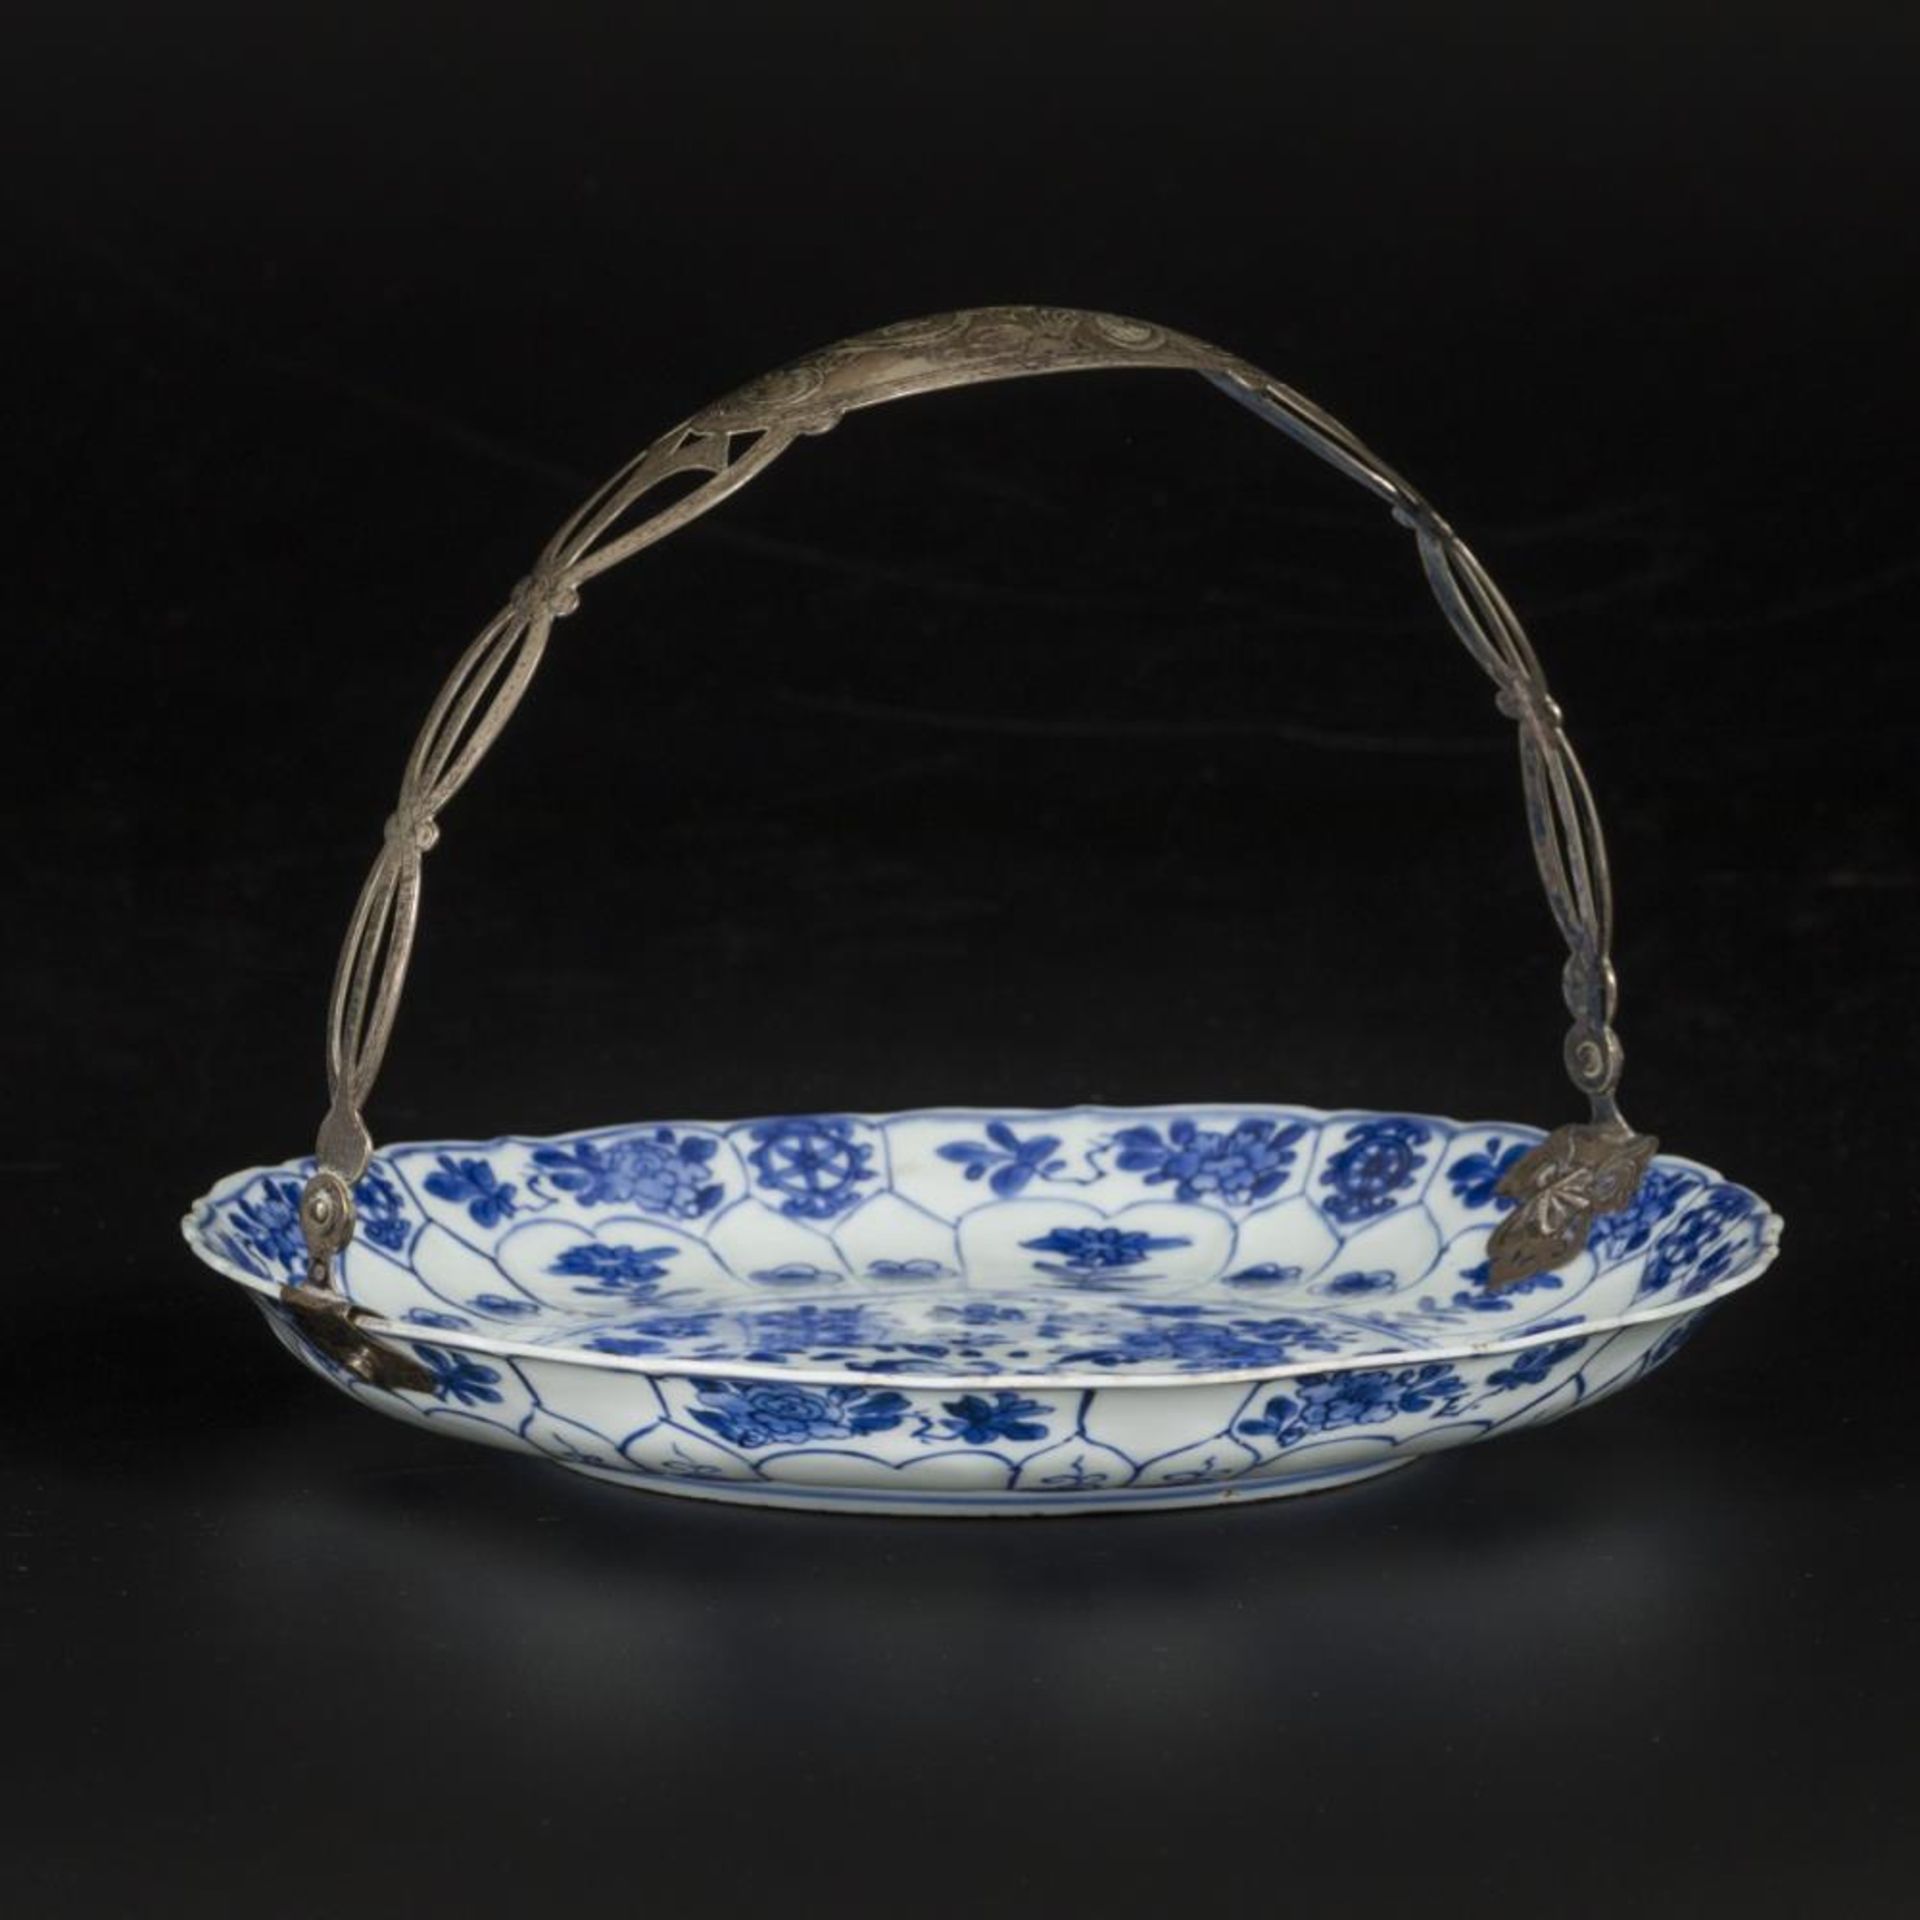 A porcelain charger with floral decoration, marked in period China, Kangxi.